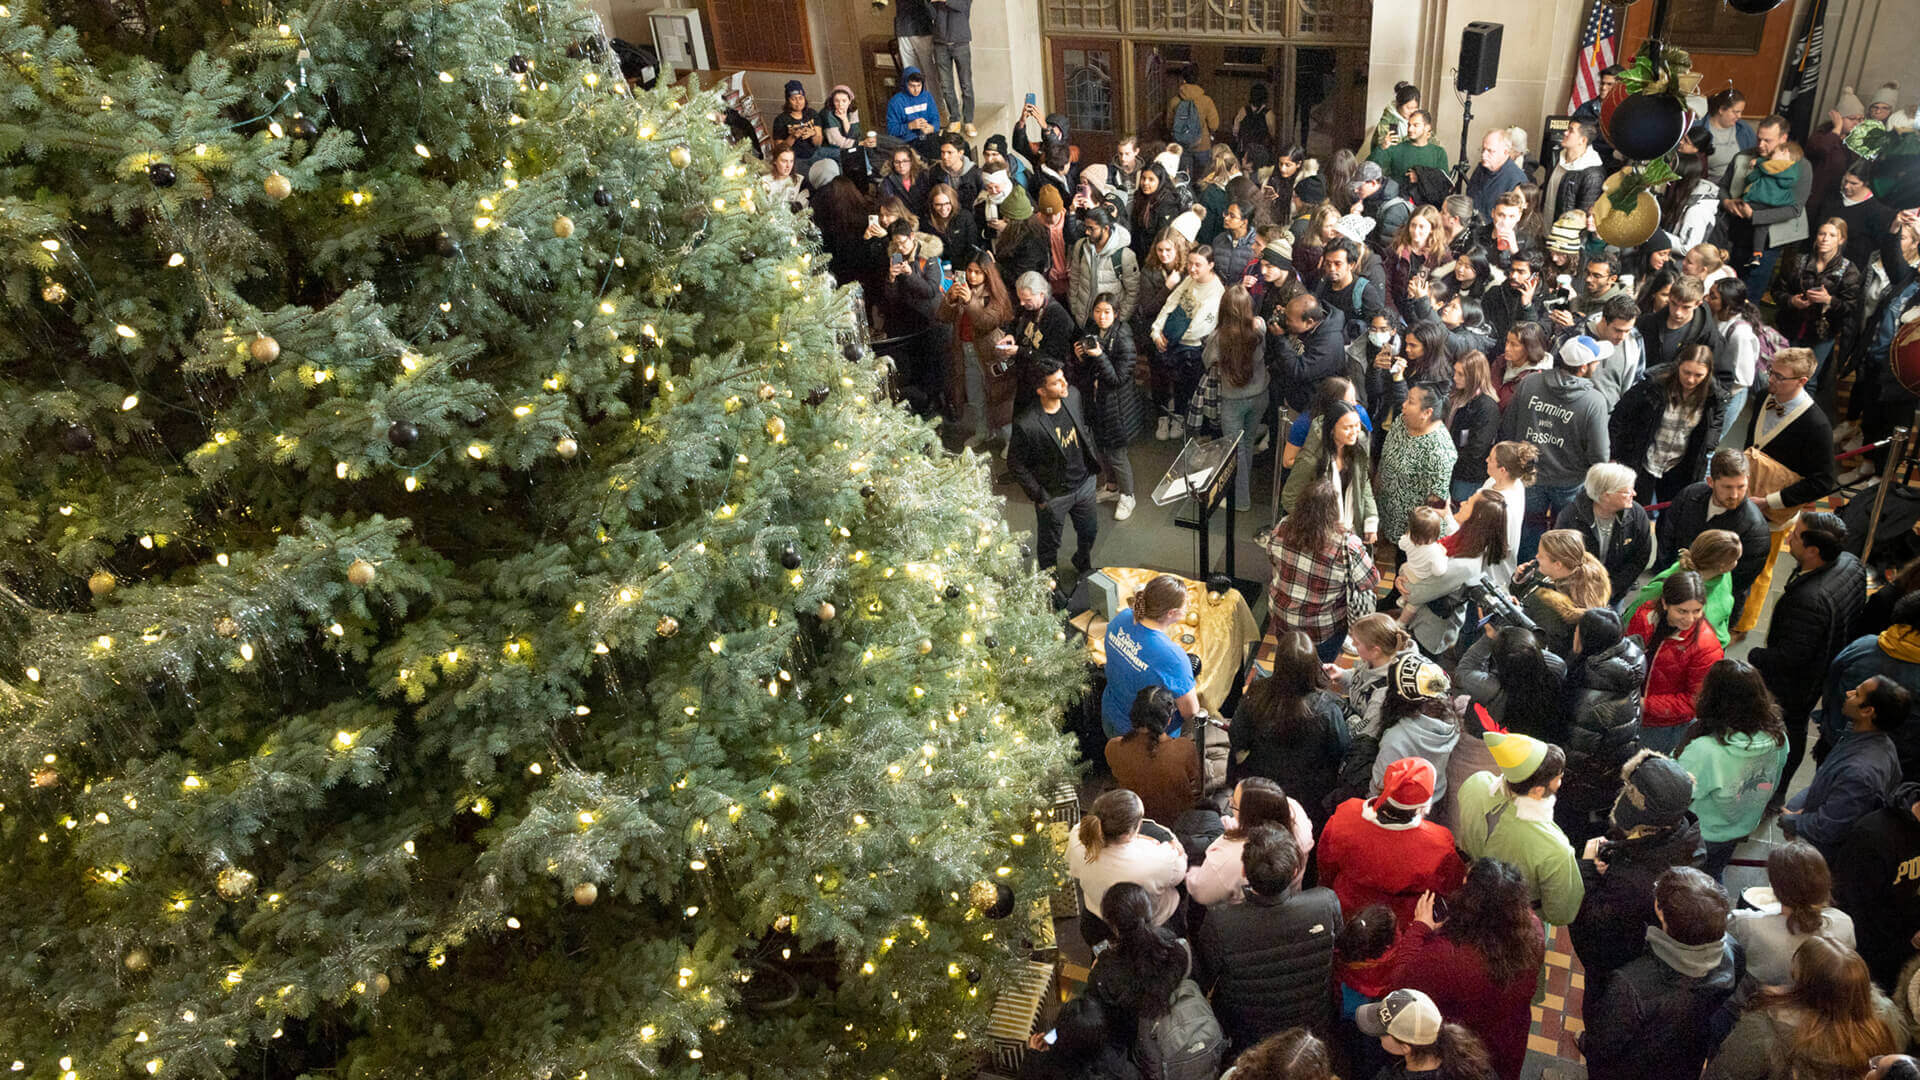 The Purdue Memorial Union’s Christmas tree-lighting ceremony is one of the highlights of the university’s annual holiday tradition. (Purdue University photo/John Underwood)